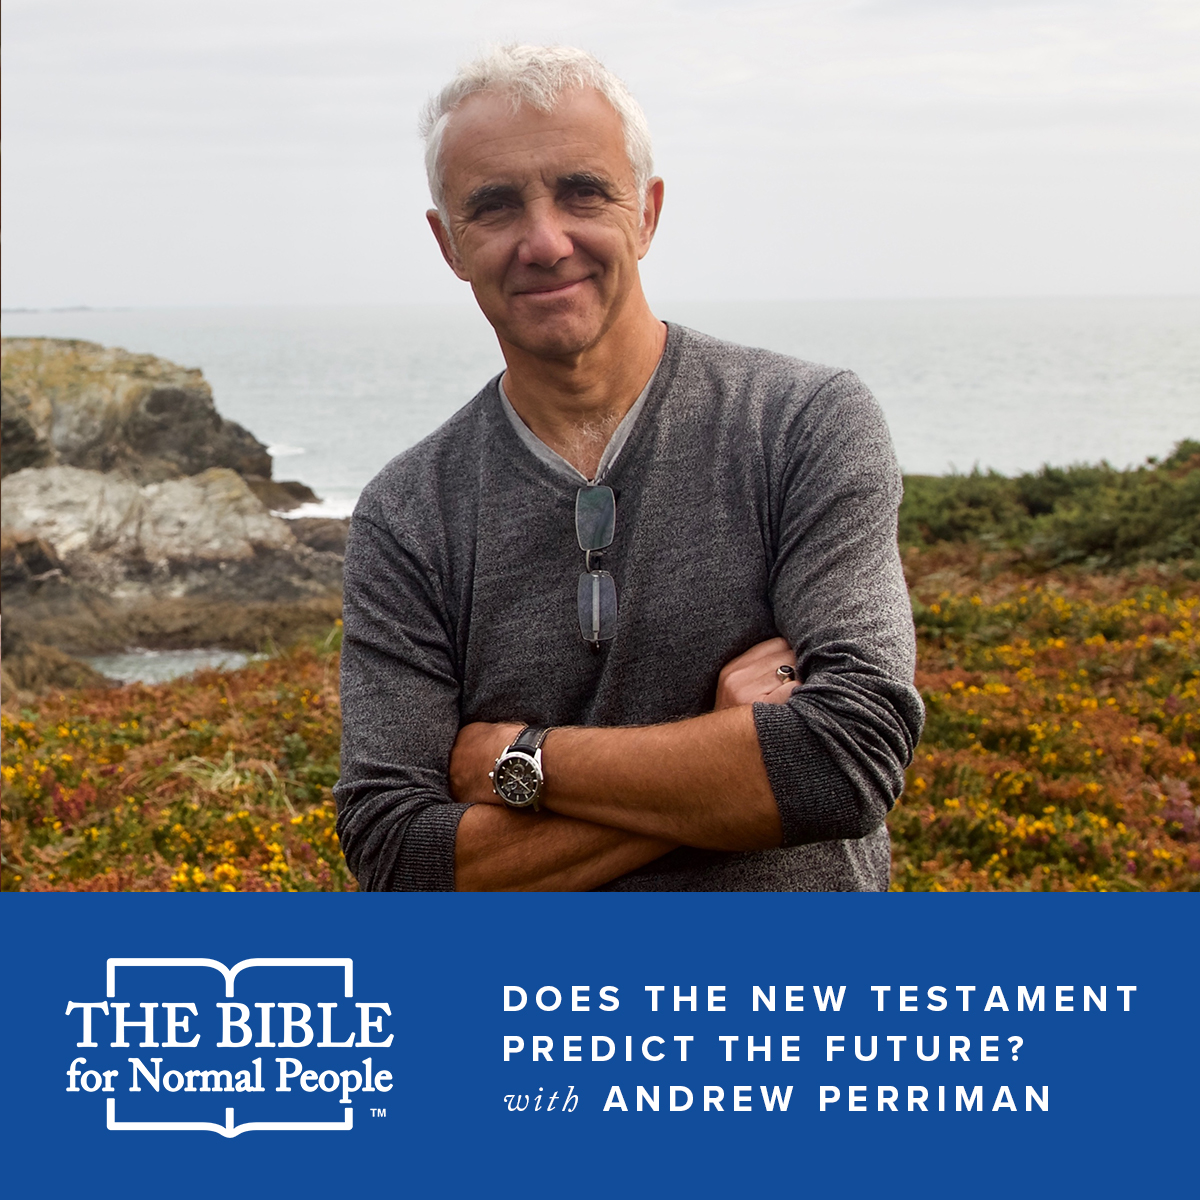 Interview with Andrew Perriman: Does the New Testament Predict the Future?